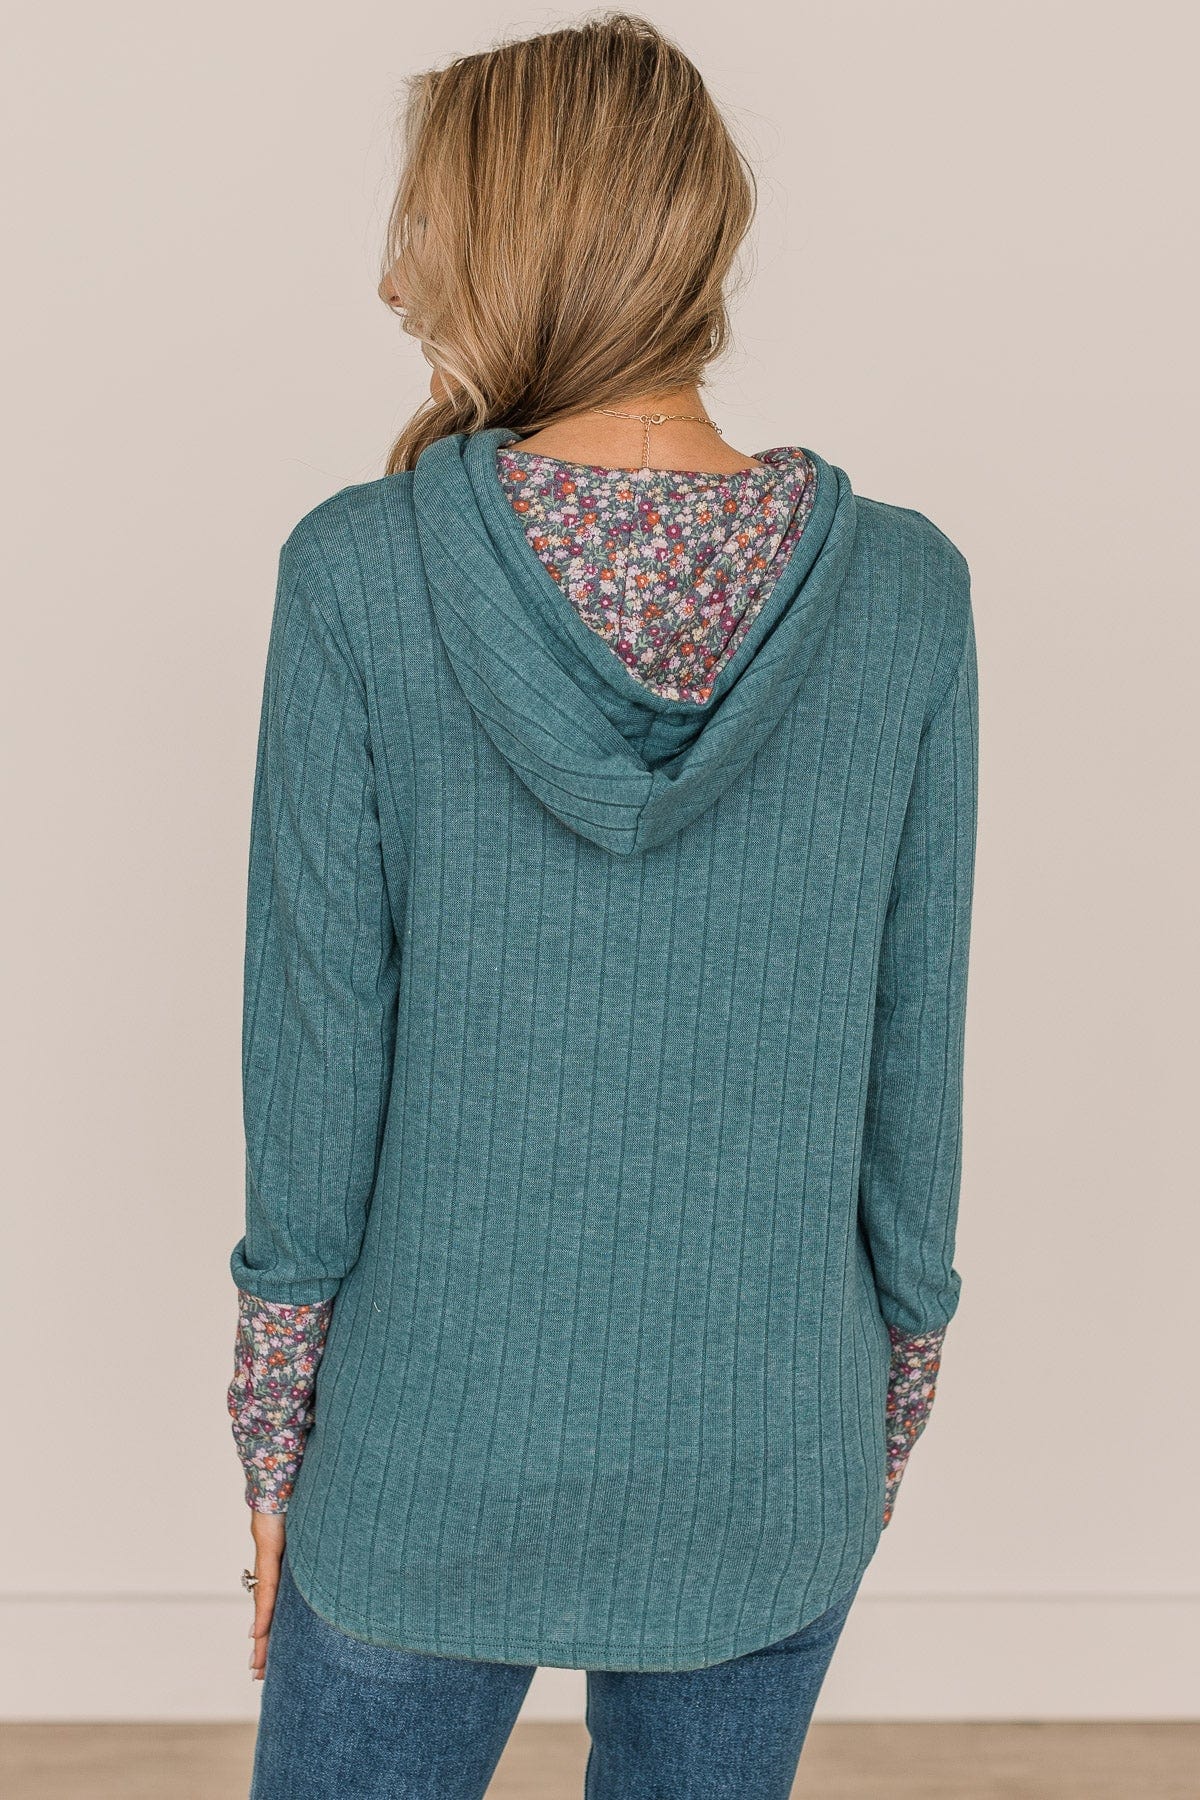 You've Got It Hooded Knit Top- Dusty Teal